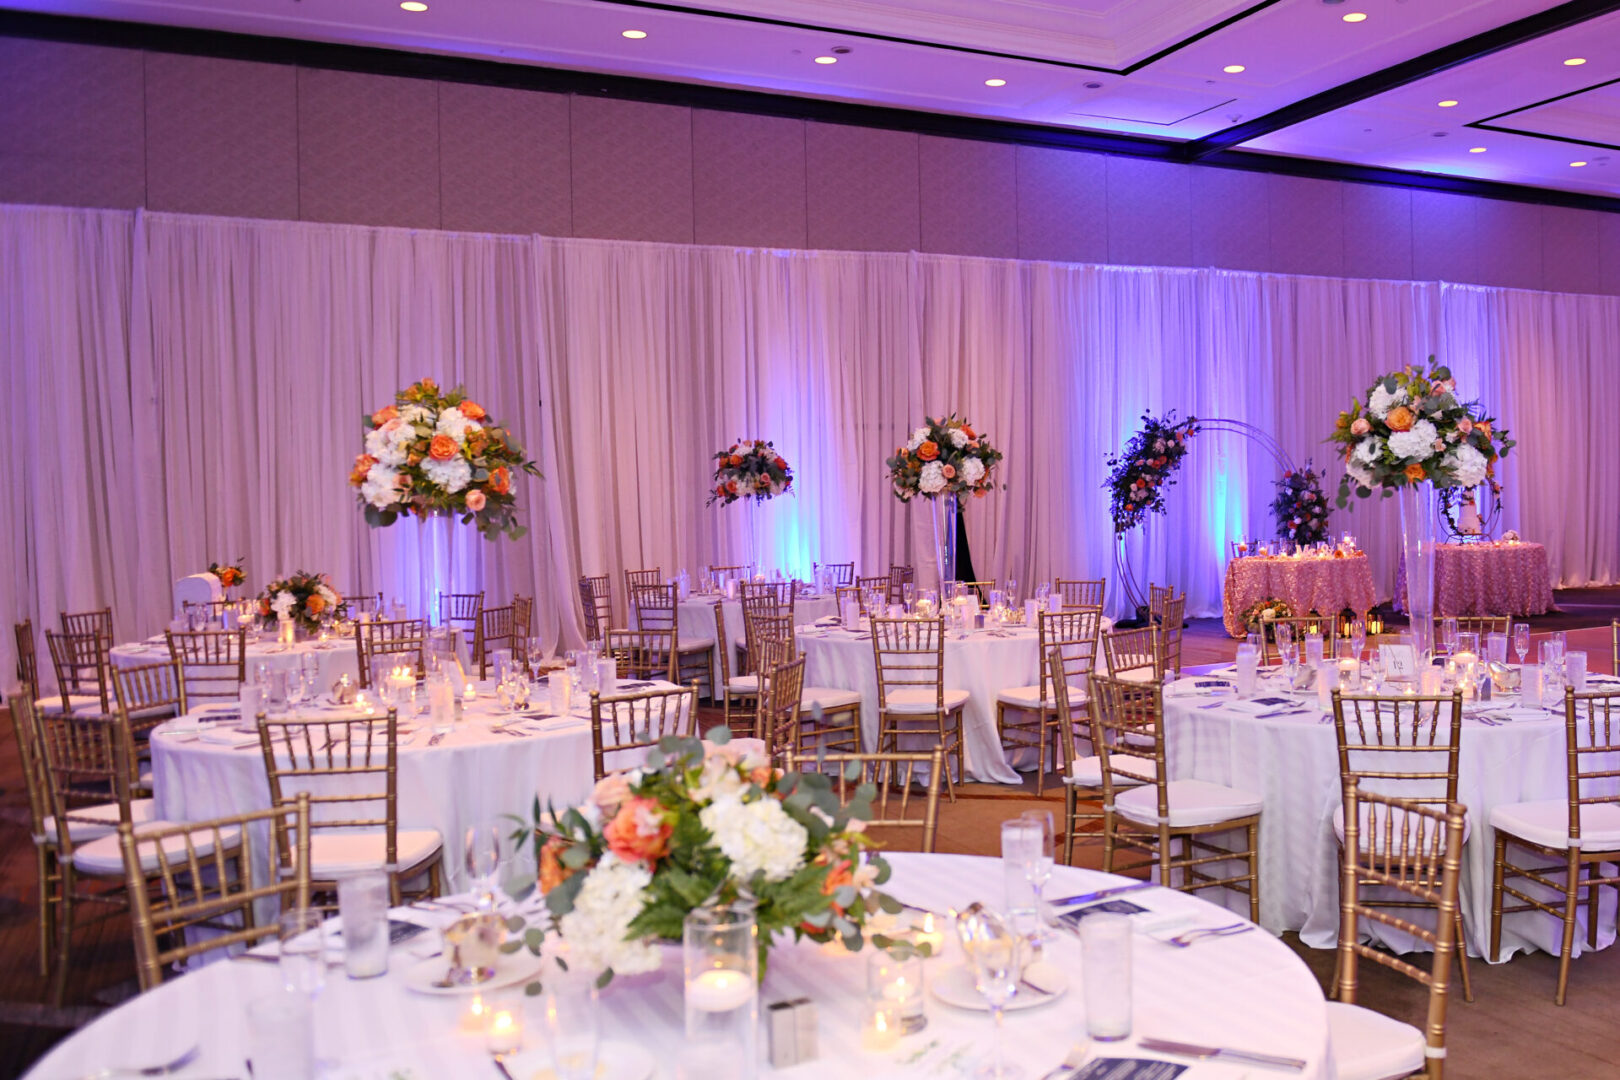 A Wedding Venue Decor With Brass Chairs